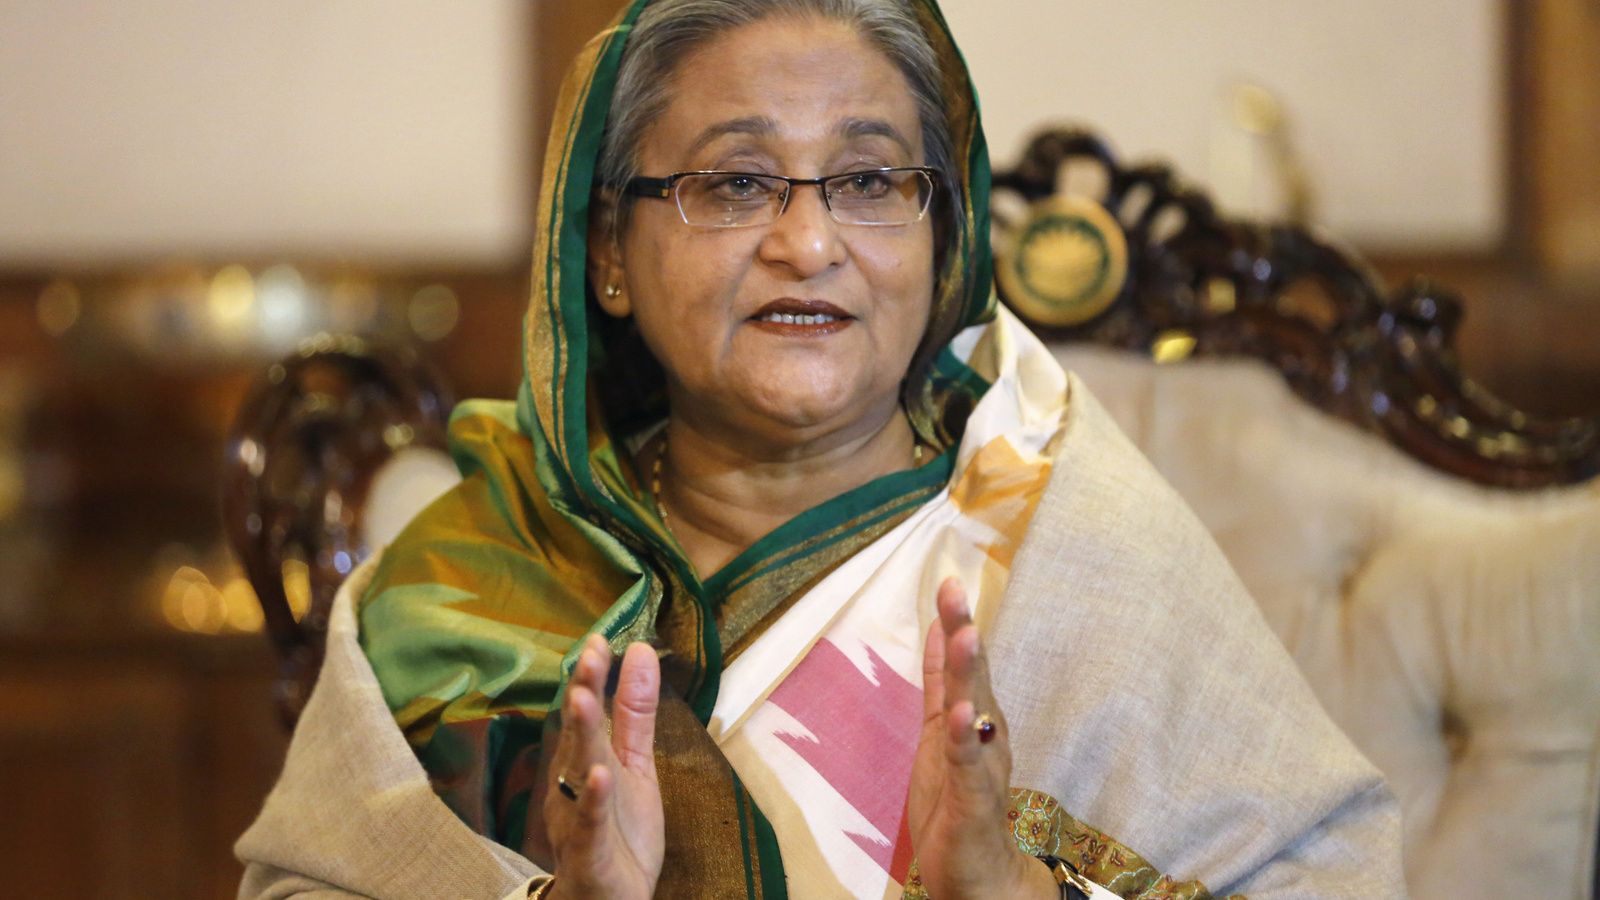 Decoding Sheikh Hasina’s Victory: Implications for Bangladesh and South Asian Geopolitics